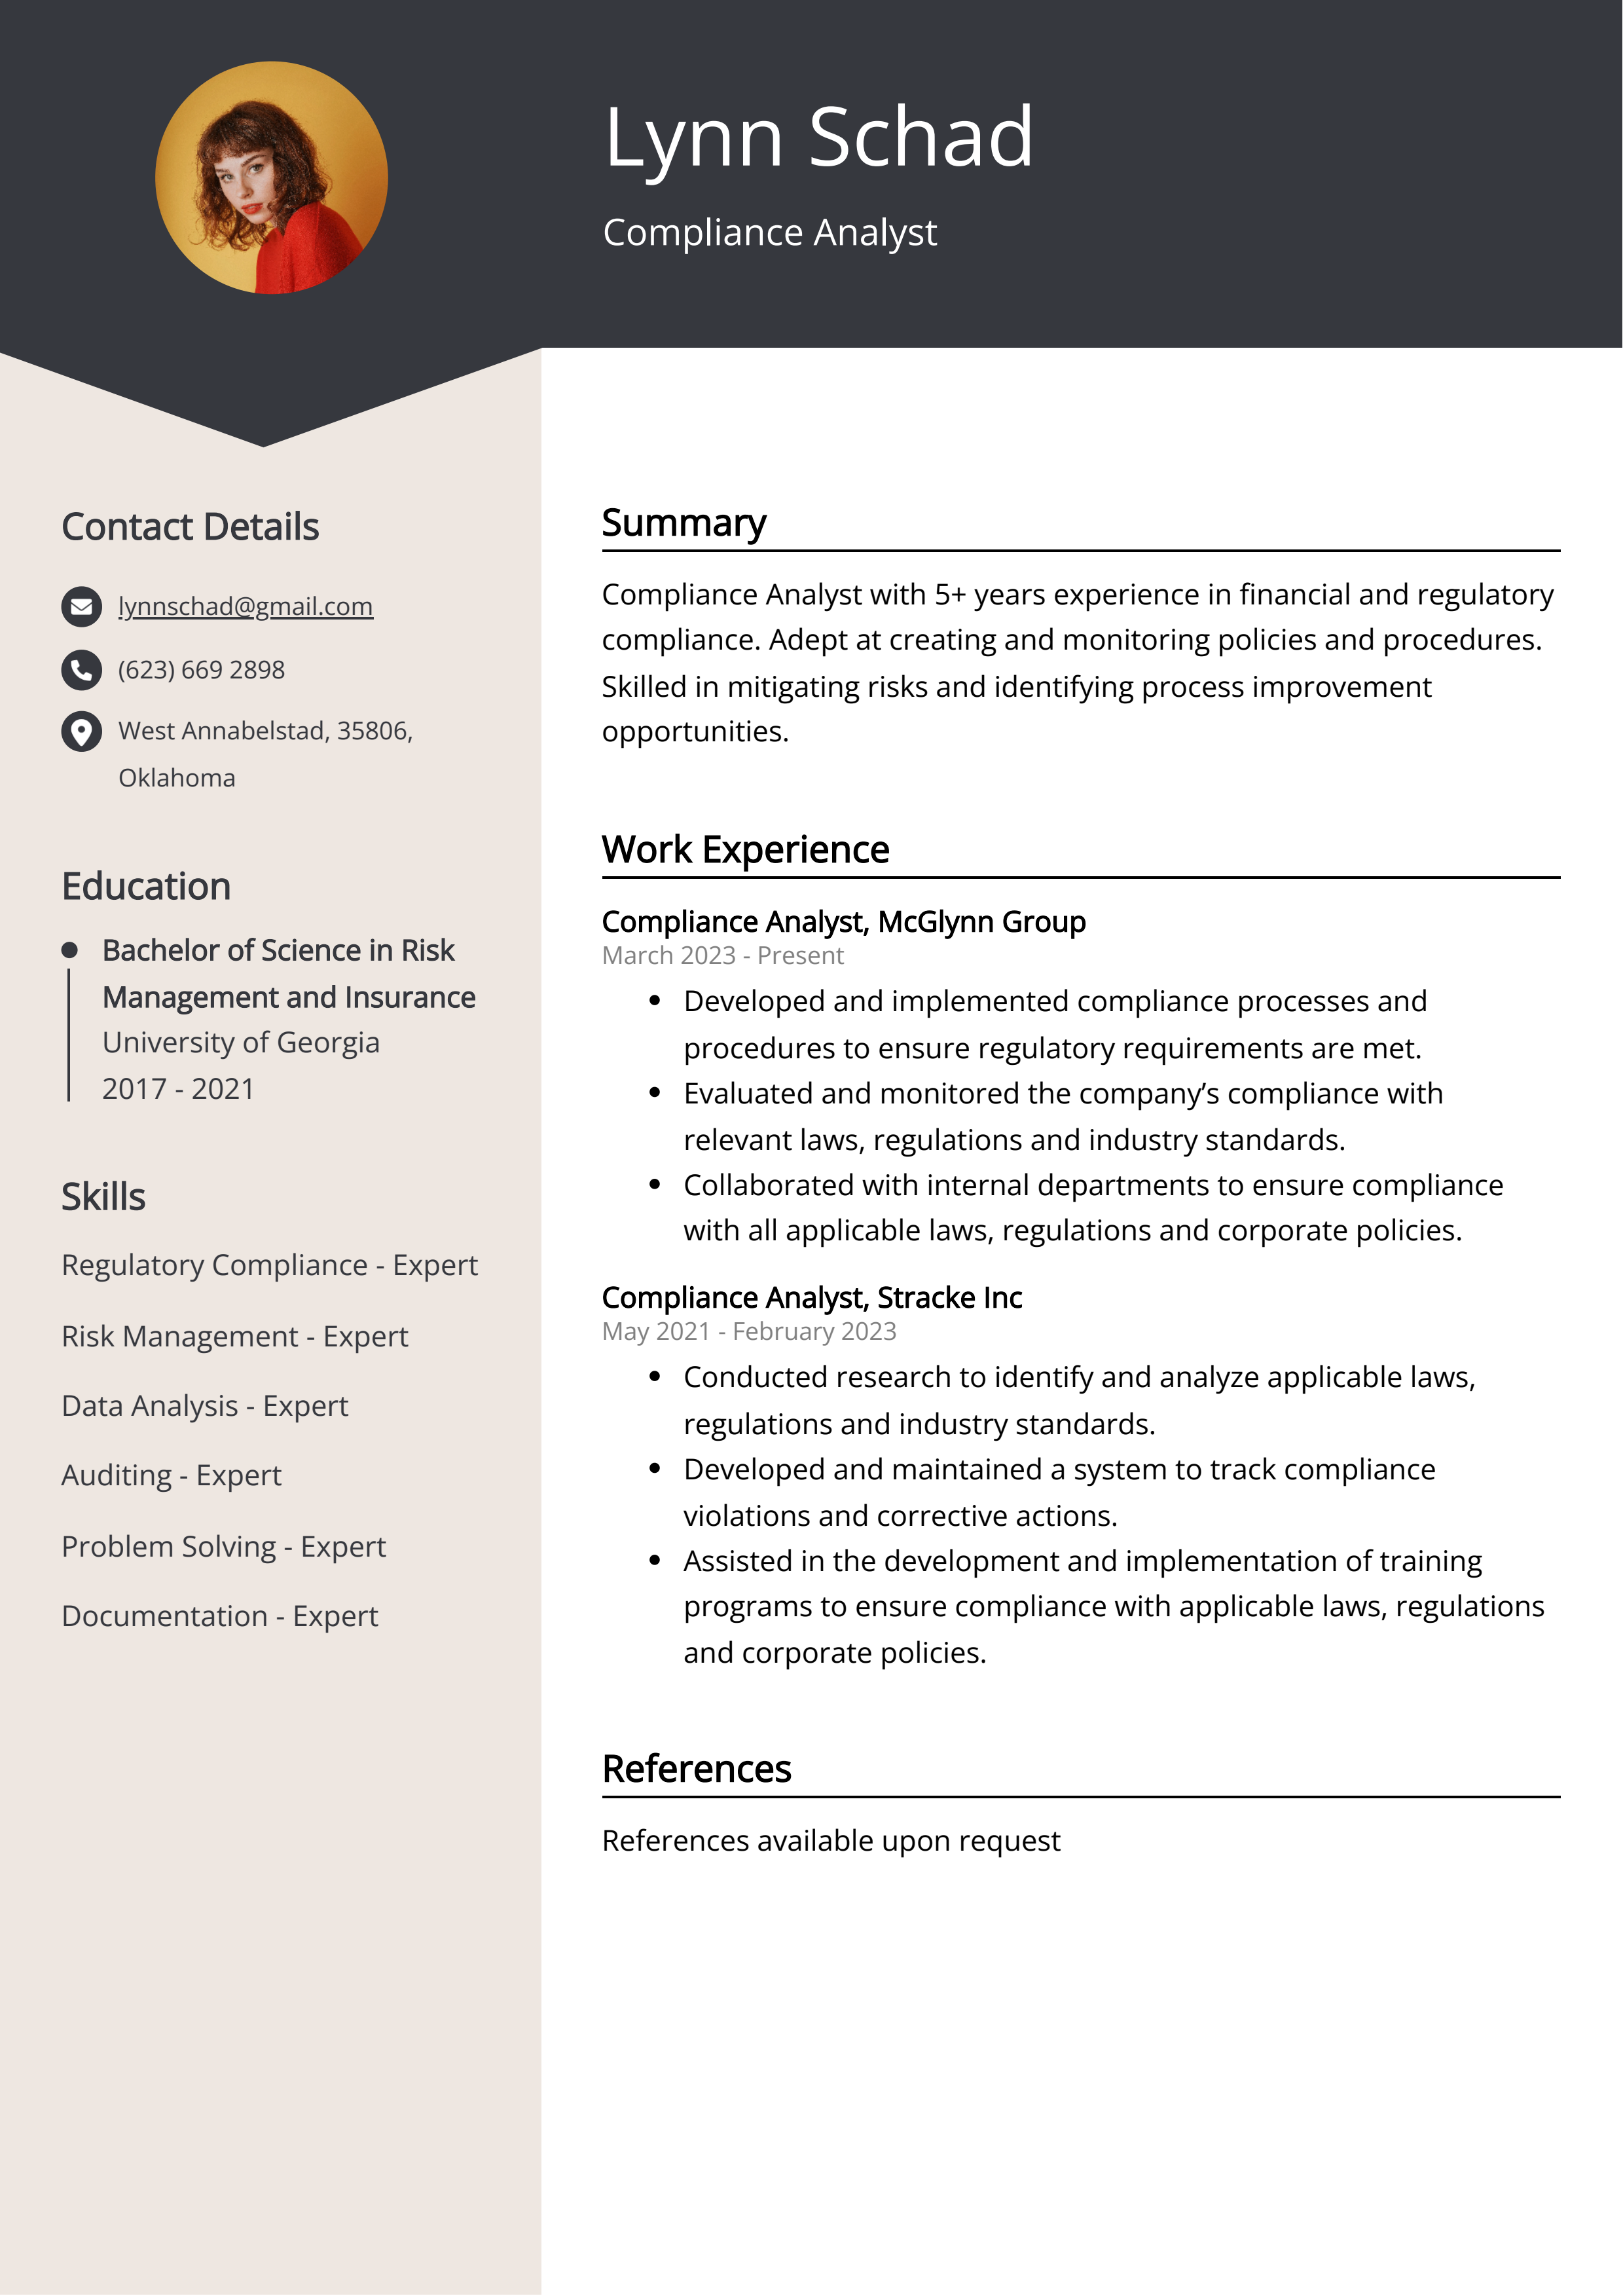 Compliance Analyst CV Example